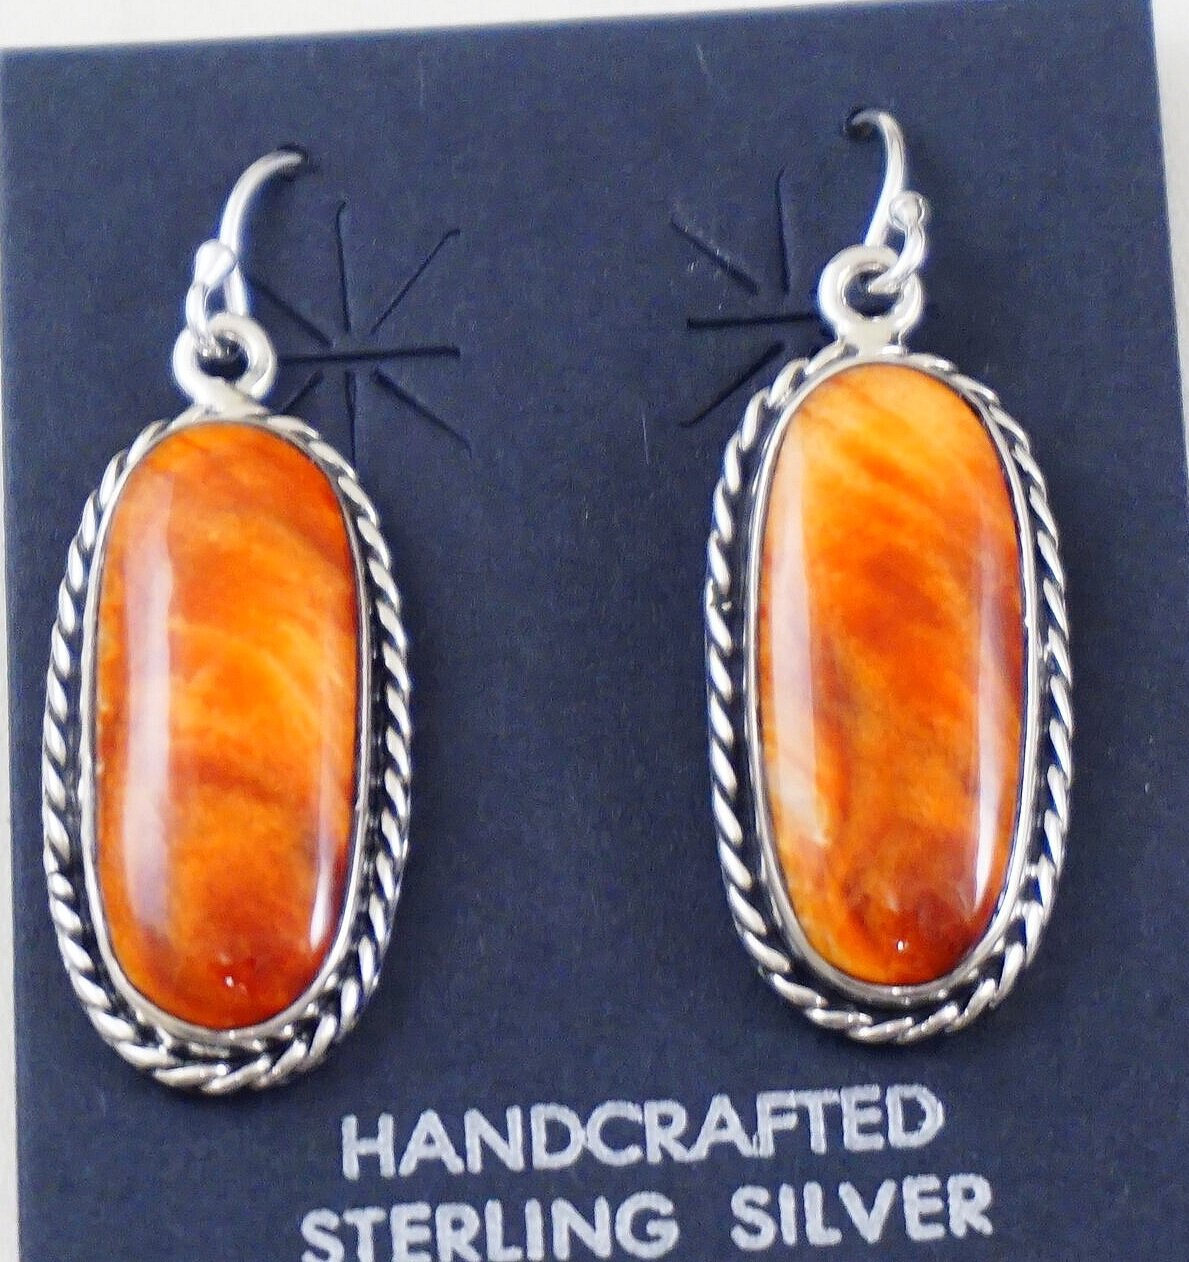 Silver Ray Details about   Navajo Handmade Sterling Silver Orange Spiny Oyster Earrings 